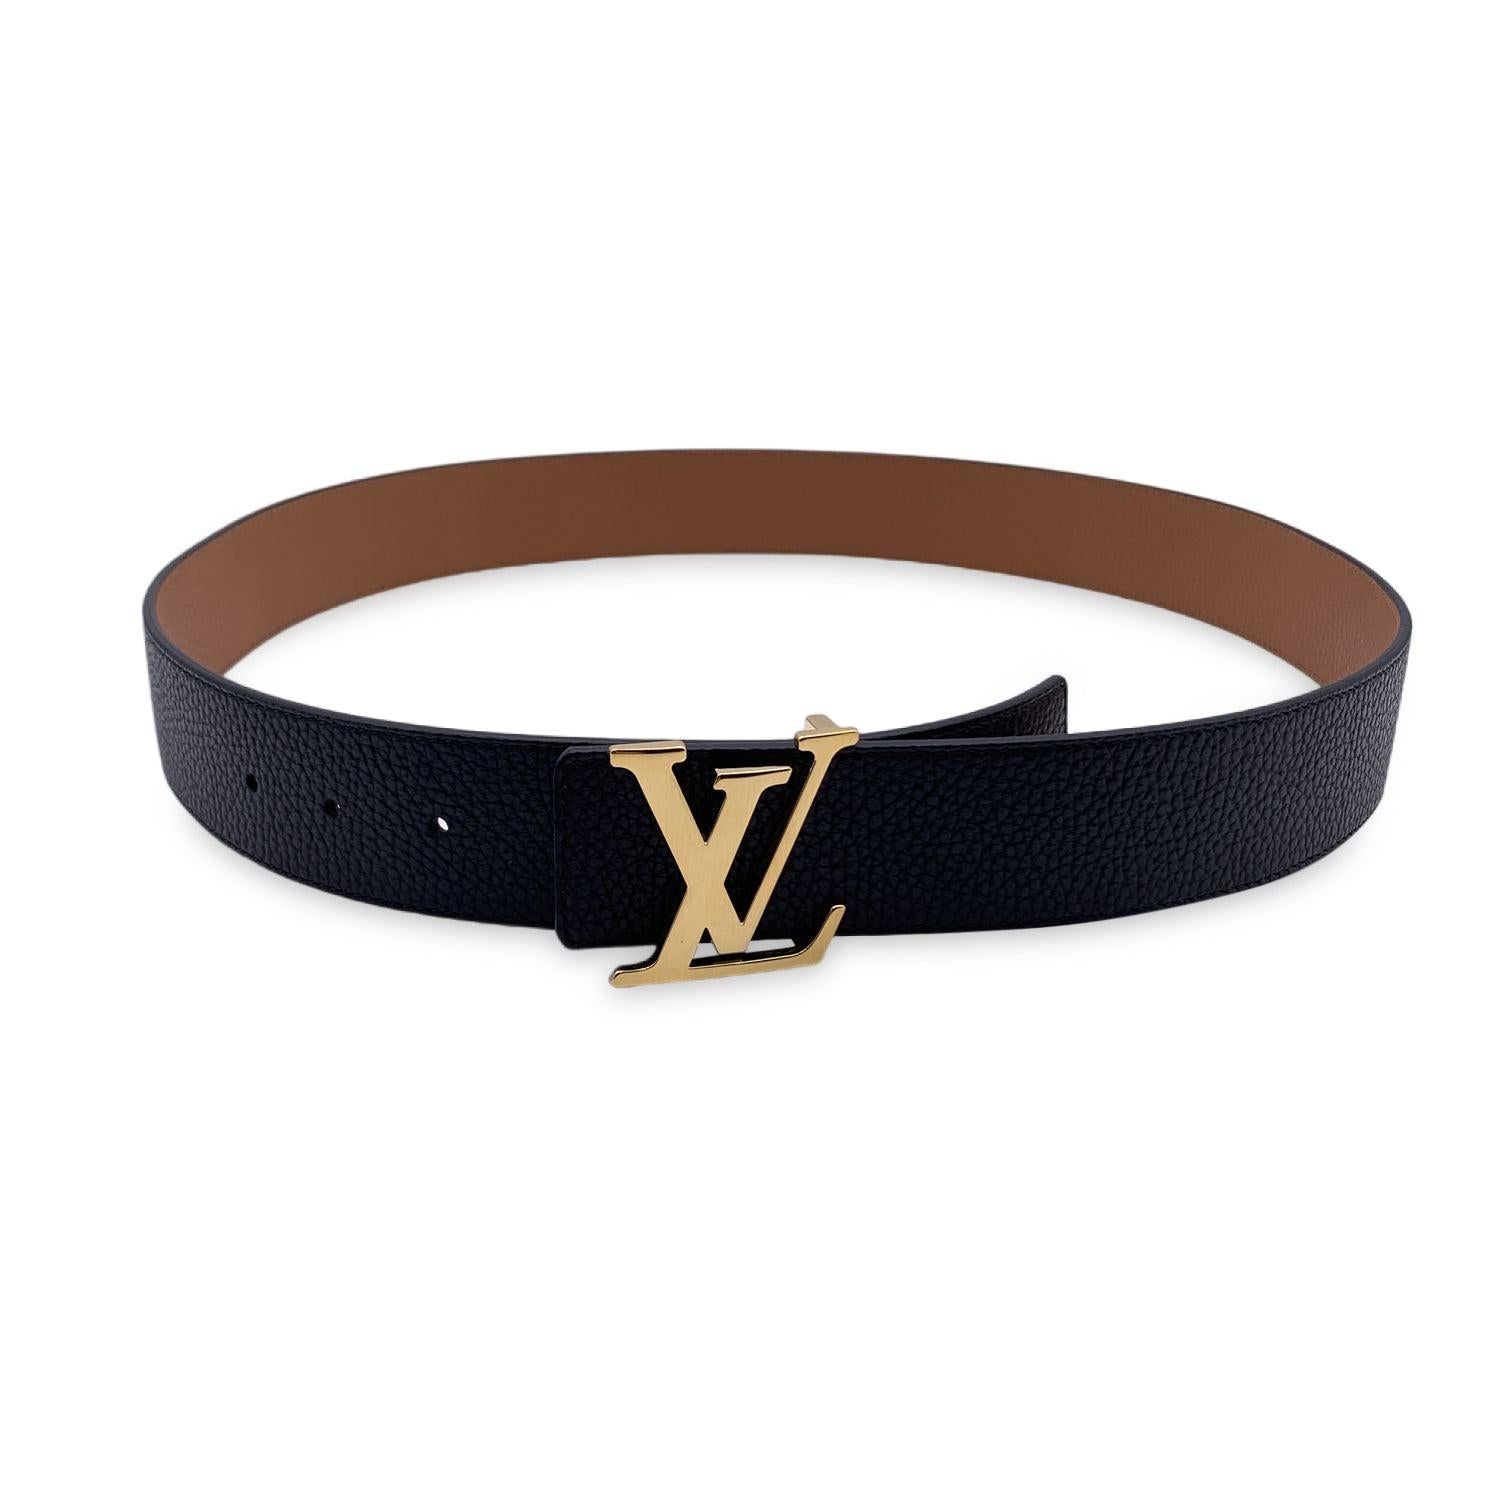 This beautiful belt will come with a Certificate of Authenticity provided by Entrupy. The certificate will be provided at no further cost

LOUIS VUITTON reversible 'LV Initiales' belt. Made of fine black and beige Taurillon leather. The belt